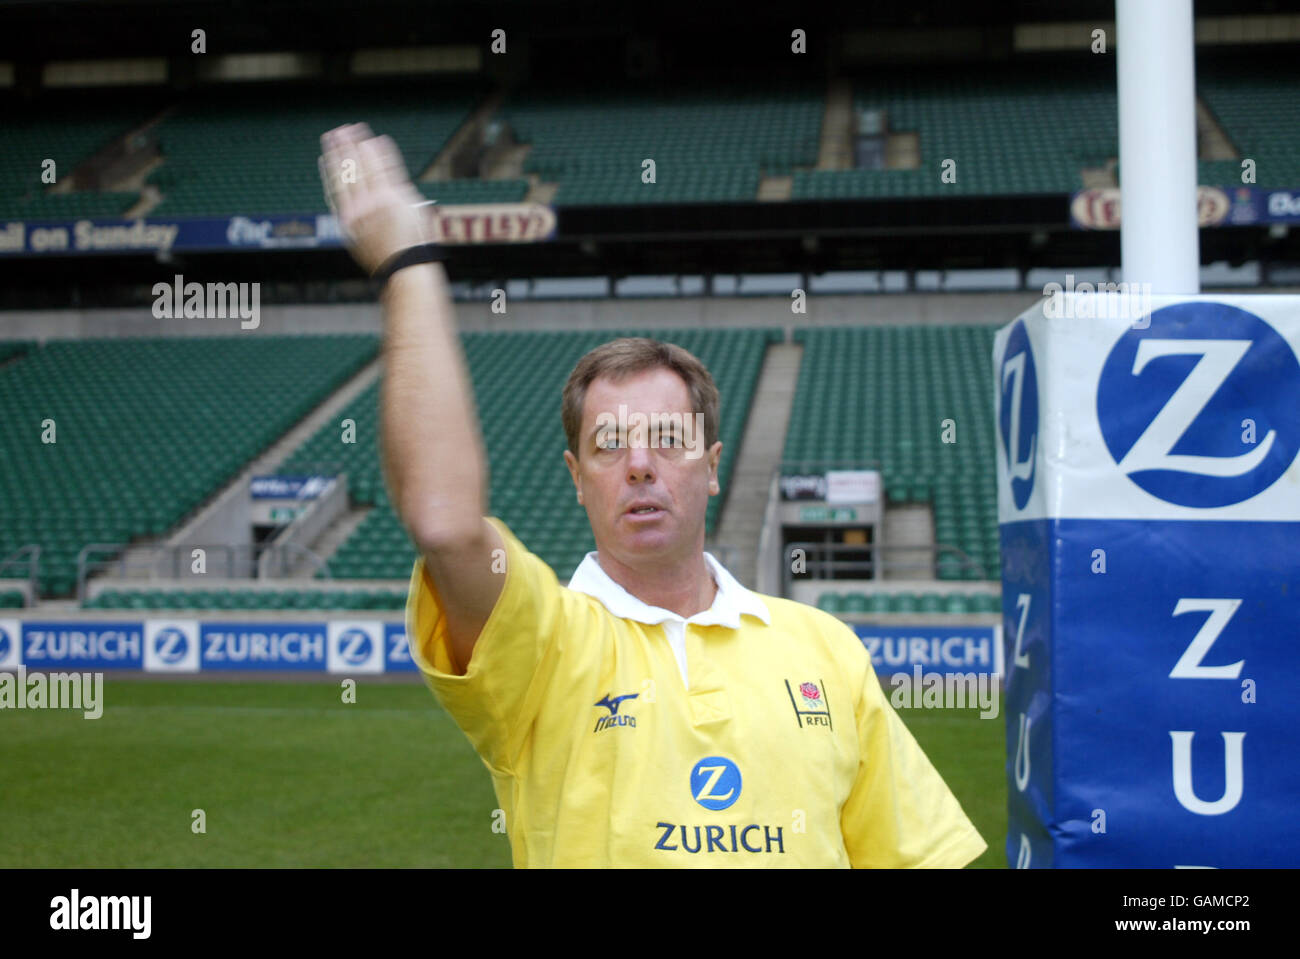 Rugby Union - Referee Signals. Throw-in at line-out not straight Stock Photo